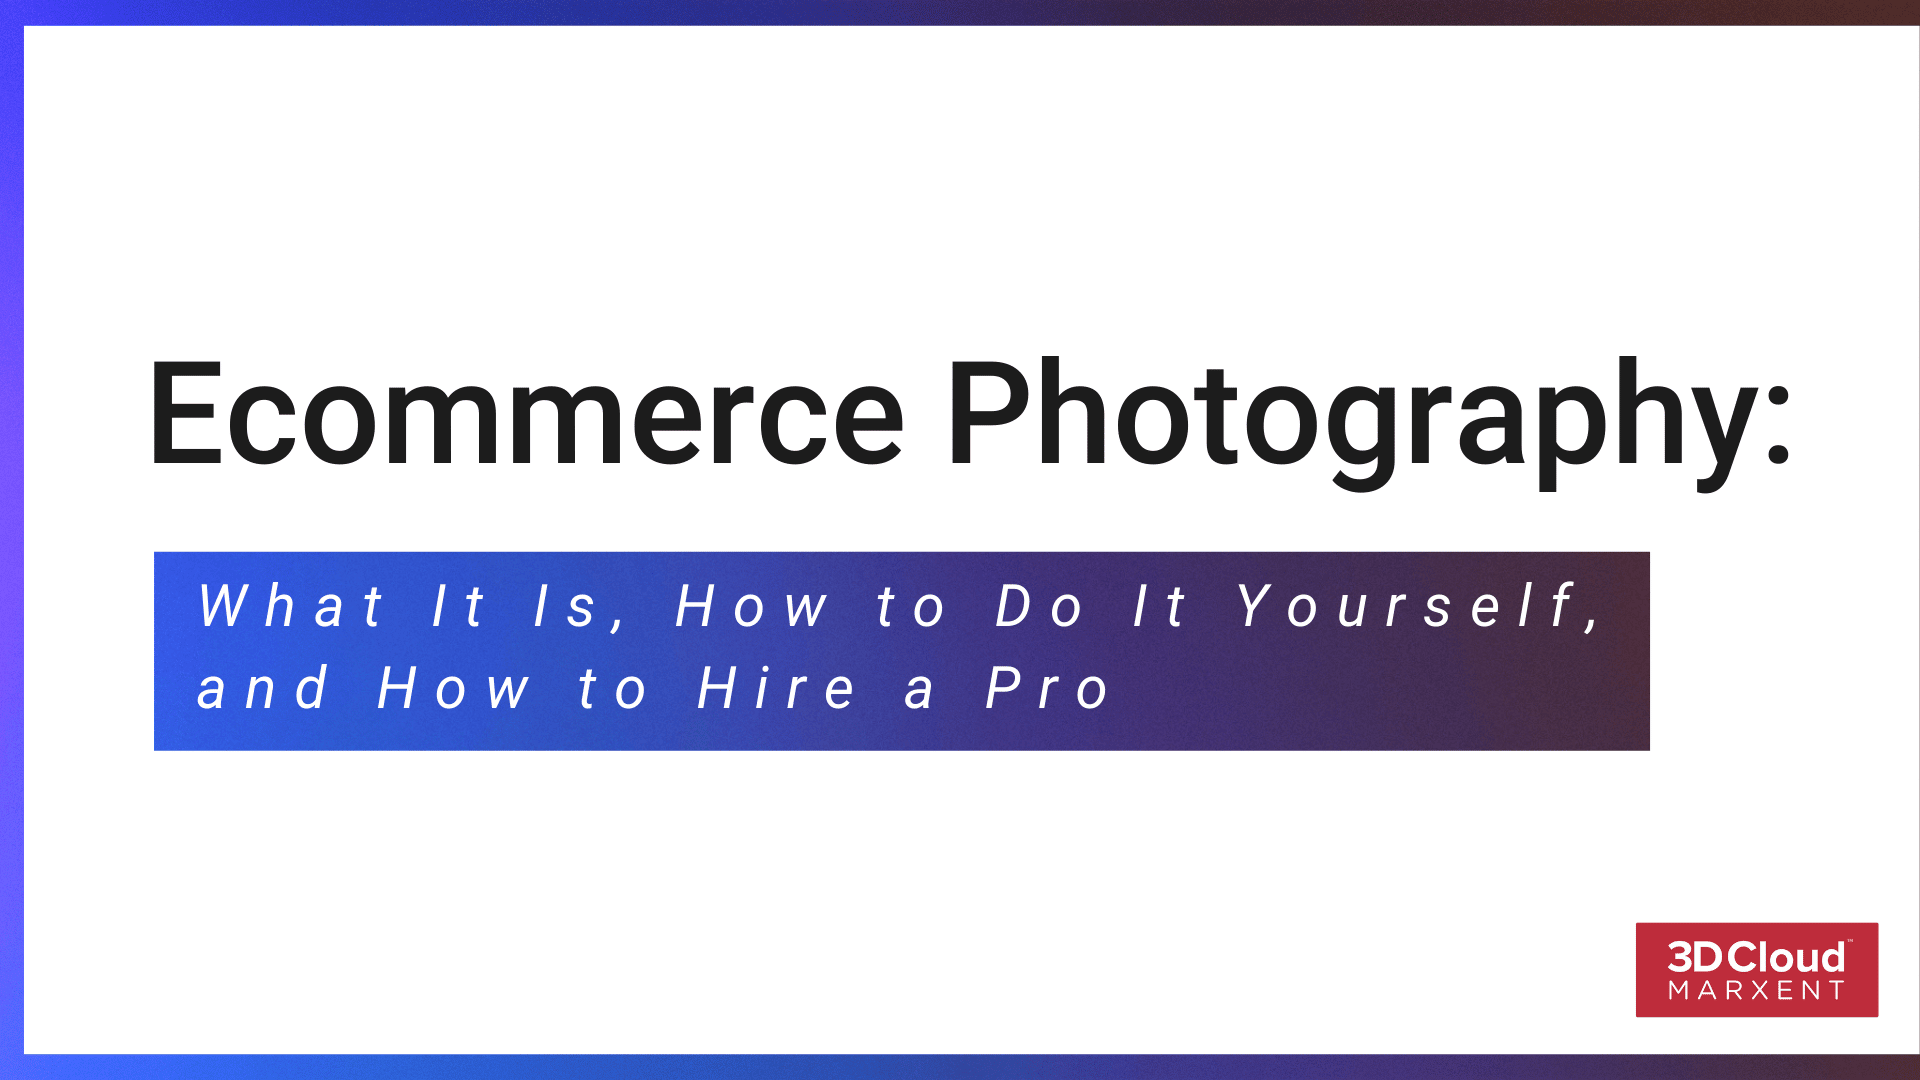 Ecommerce Photography: What It Is, How to Do it Yourself, and How to Hire a Pro